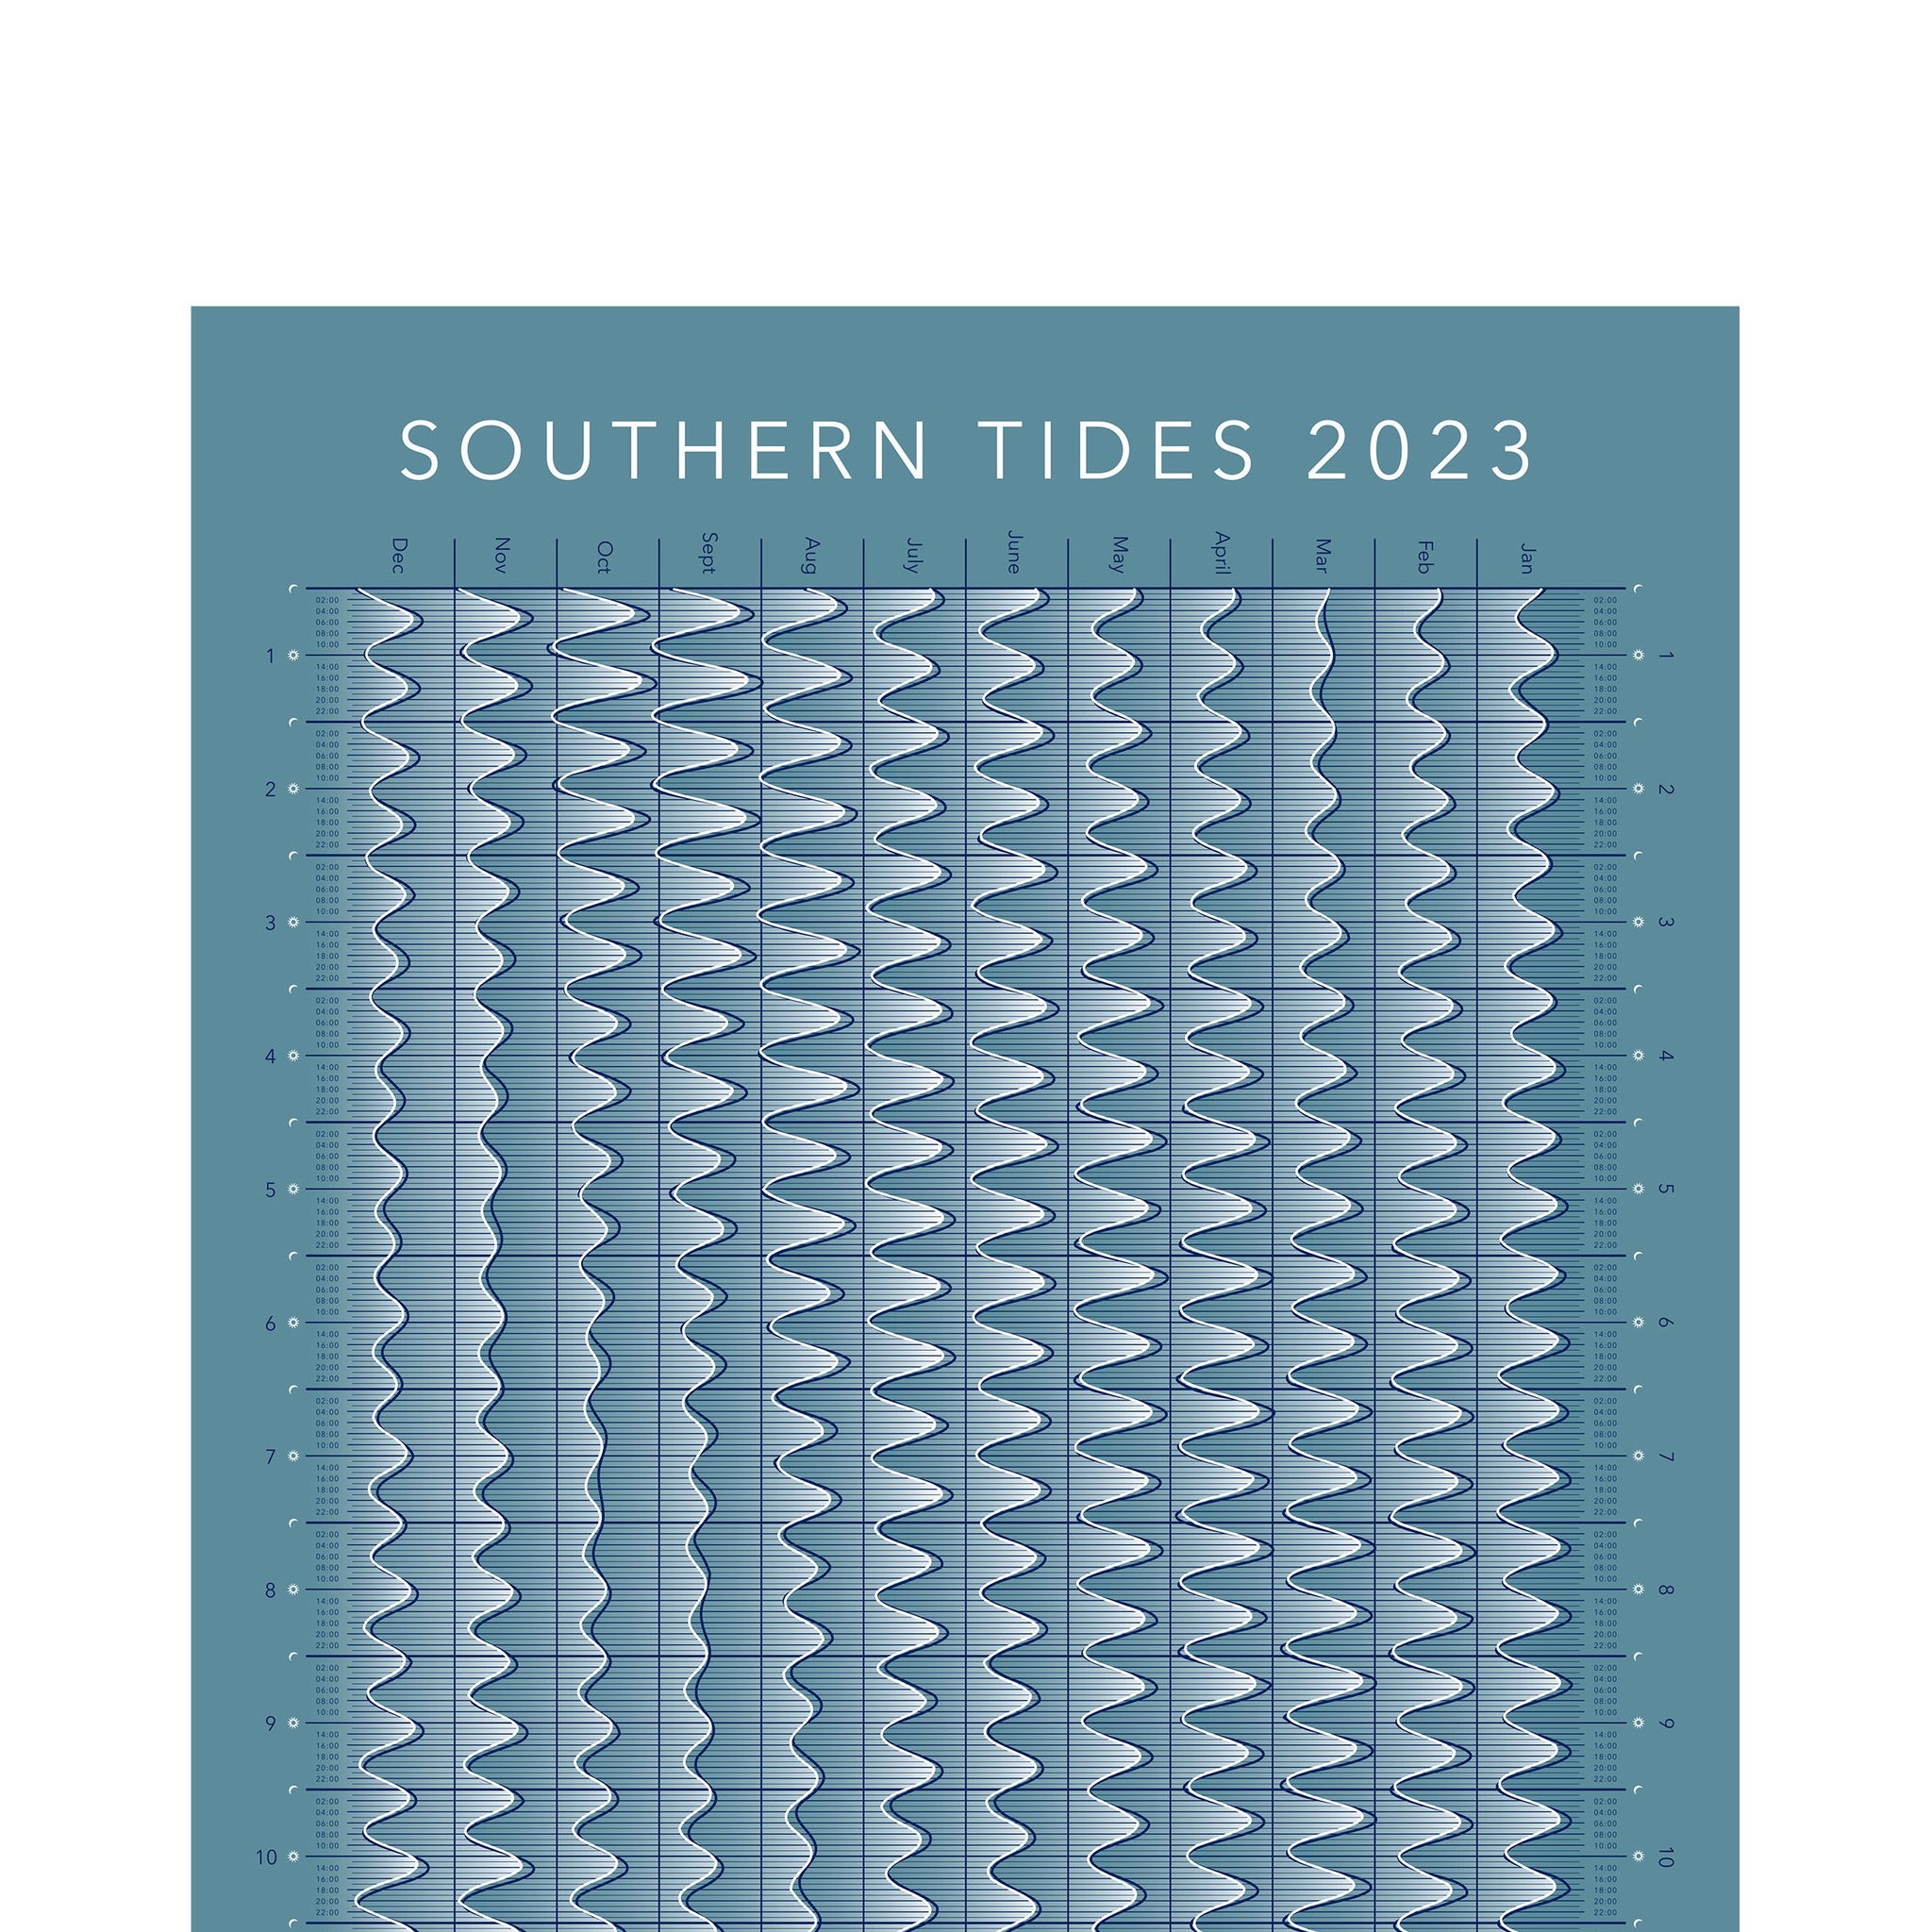 Poster Southern Tides 2023